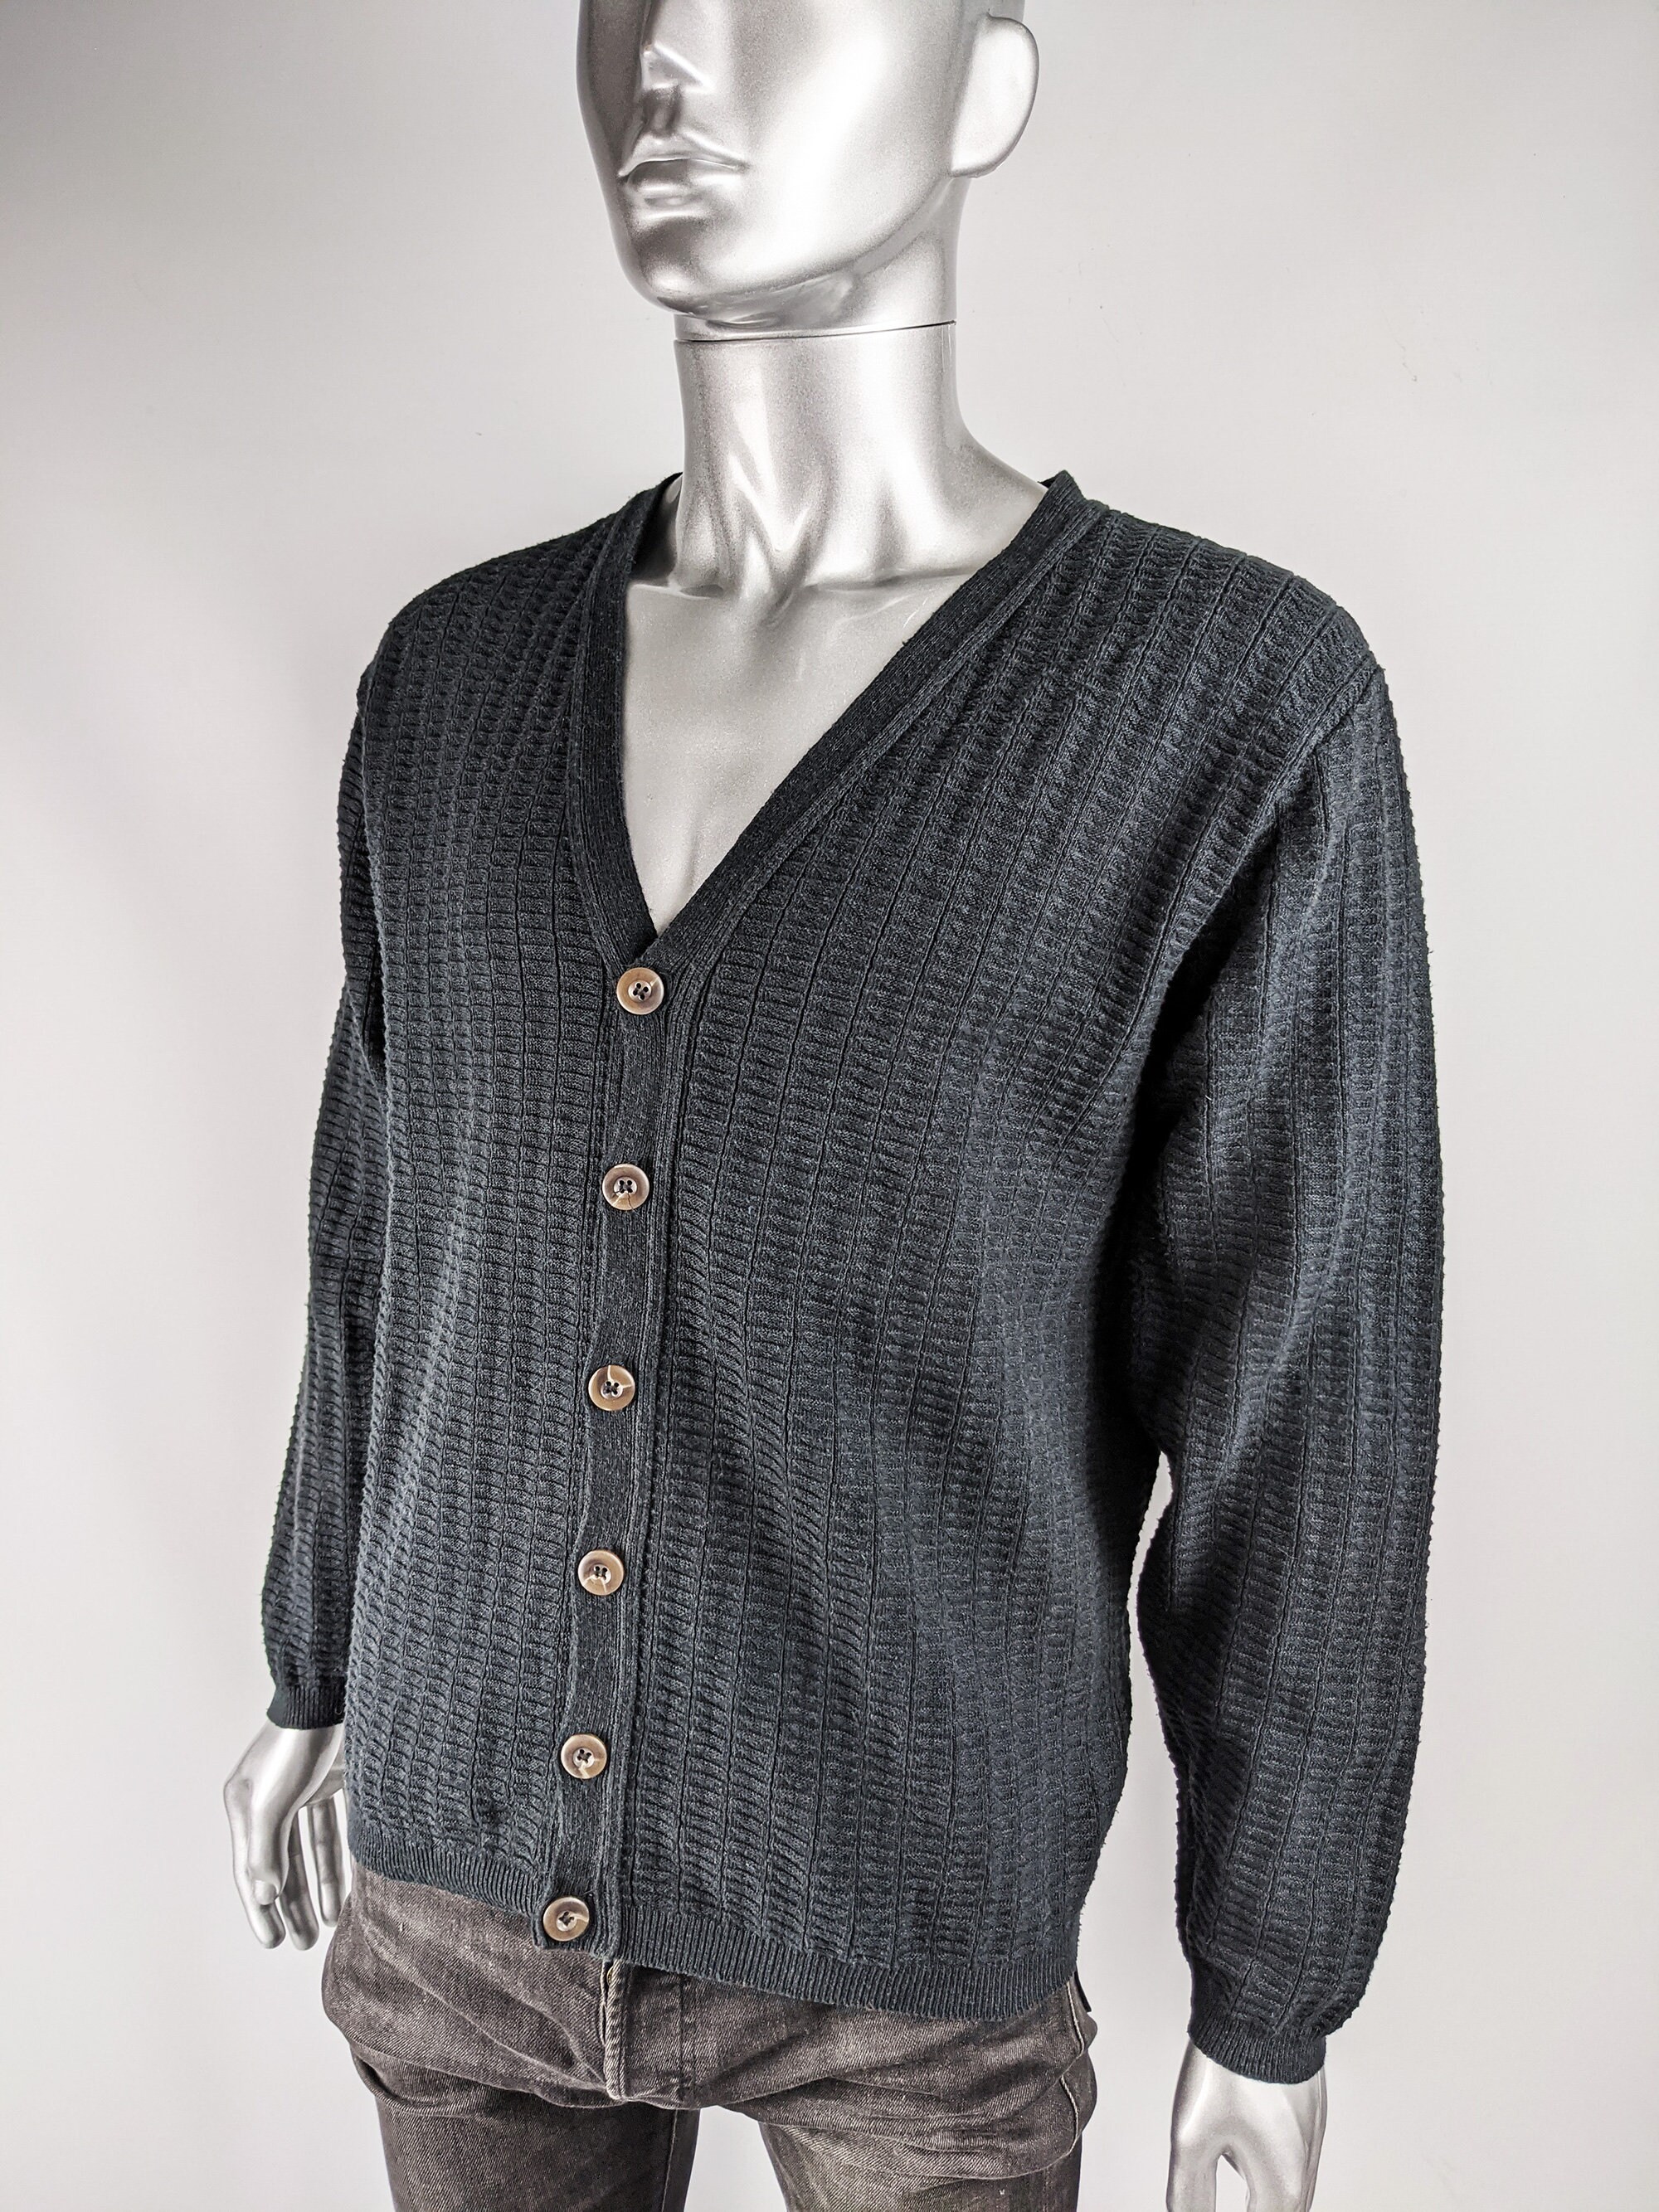 Vintage BILL BLASS Mens Cardigan Sweater Charcoal Grey Gents Knitwear Waffle Knit Made in the USA Classic 50s Style Preppy Cardigan 1980s Clothing Mens Clothing Jumpers Cardigans 